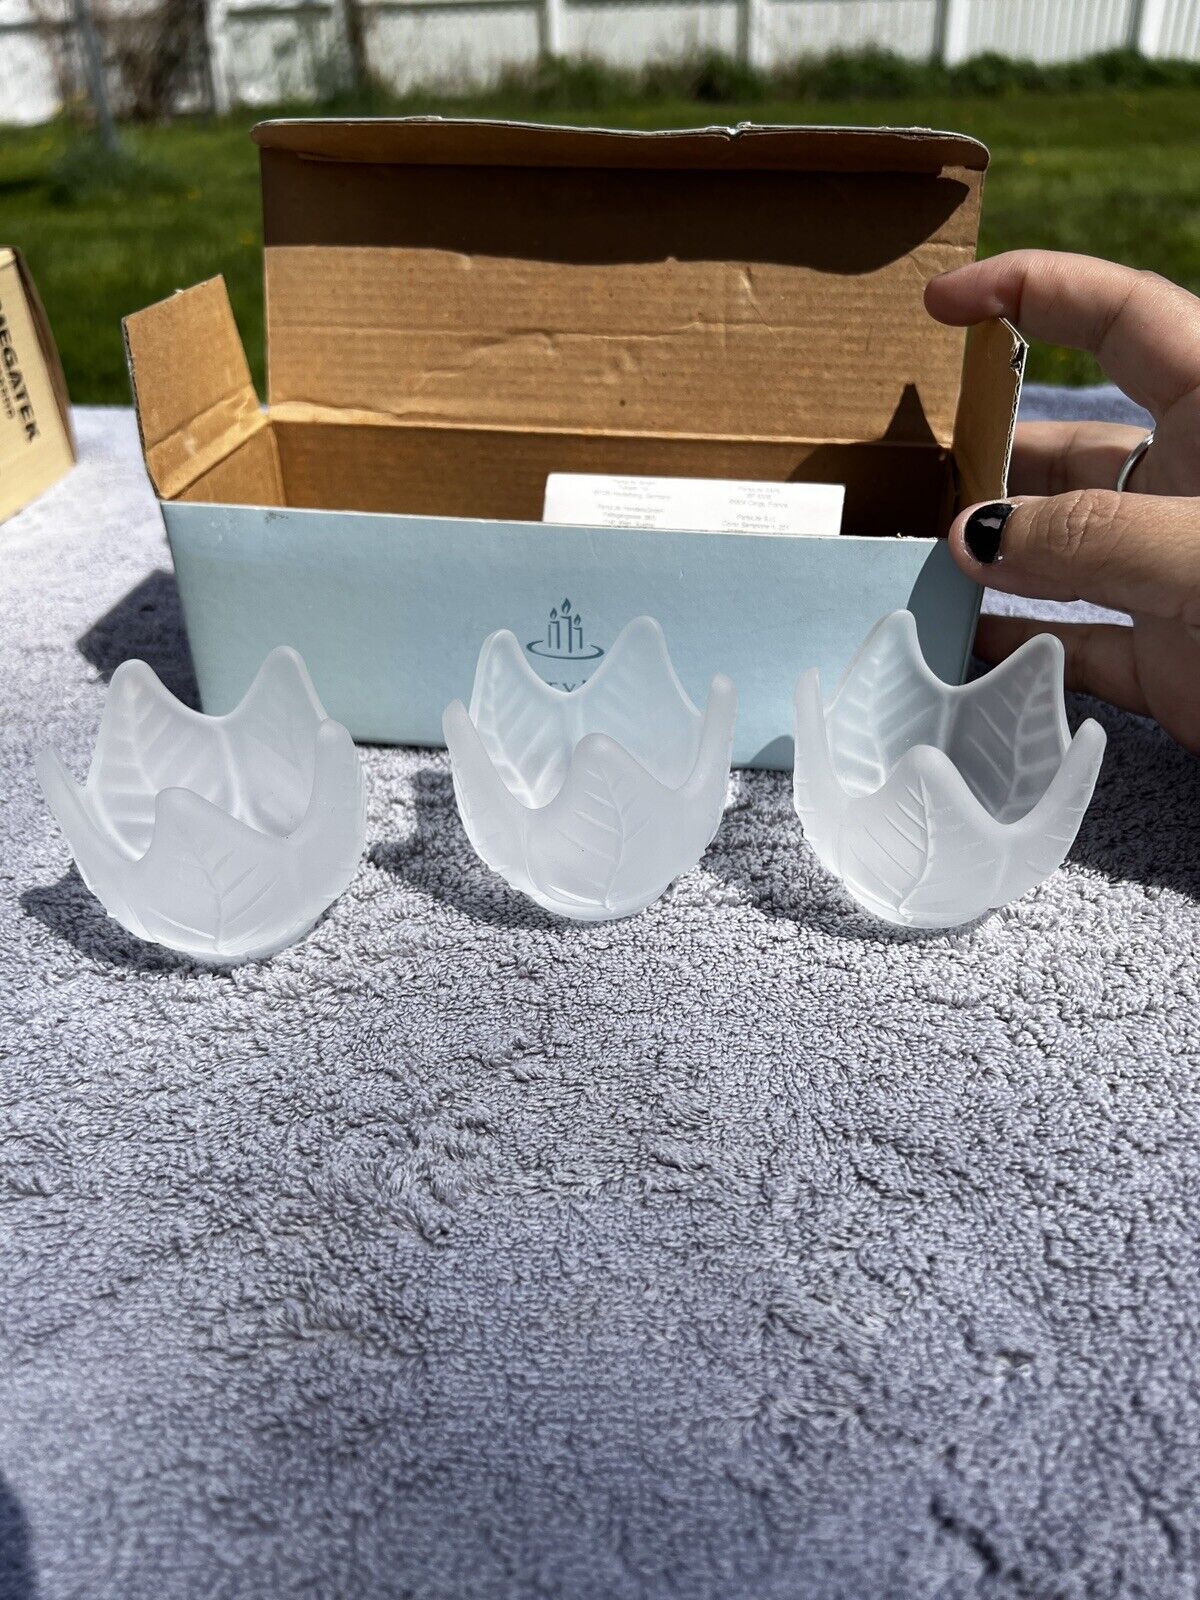 PartyLite 3 Frosted Lotus Blossom Votive Candle Holders P0290 In Original Box 